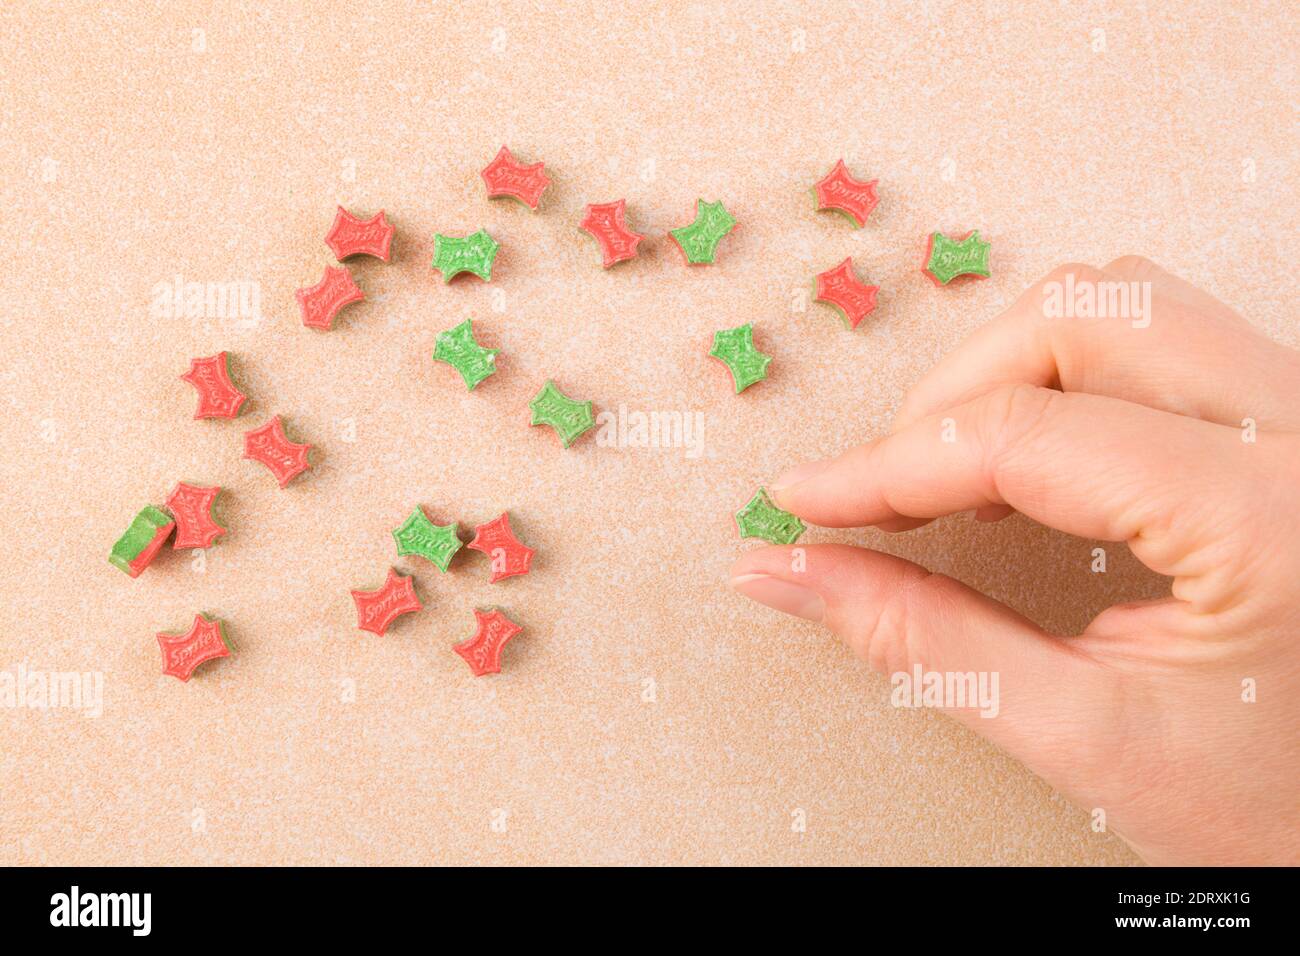 Ecstasy pill in female hand. MDMA assisted psychedelic therapy. Stock Photo